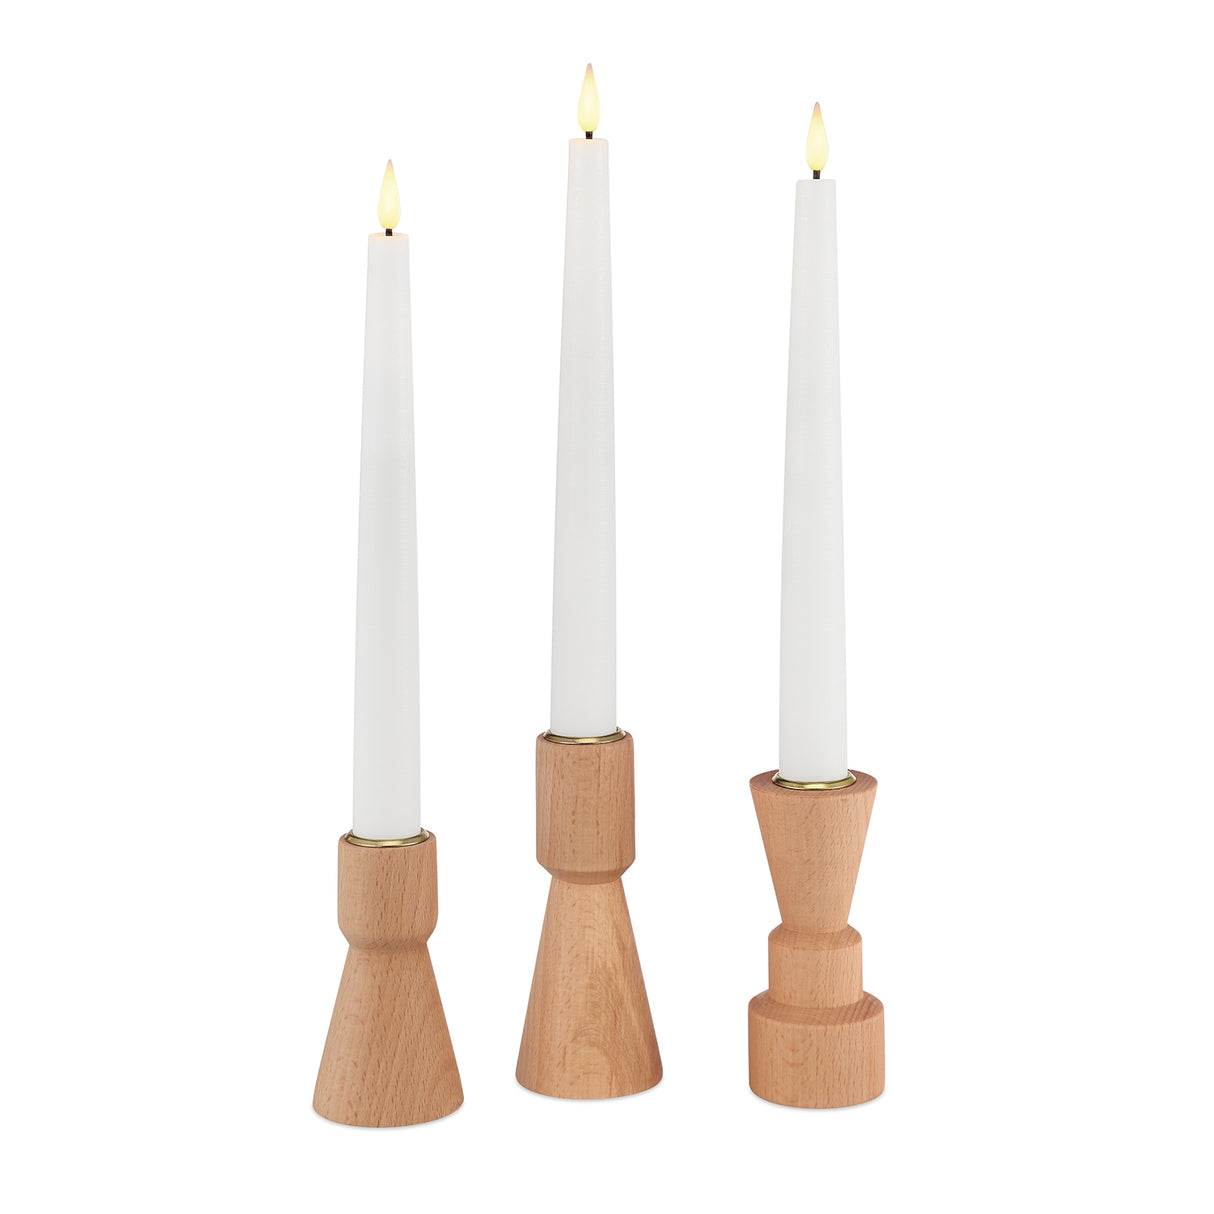 Trey Wooden Taper Candle Holders, Set of 3